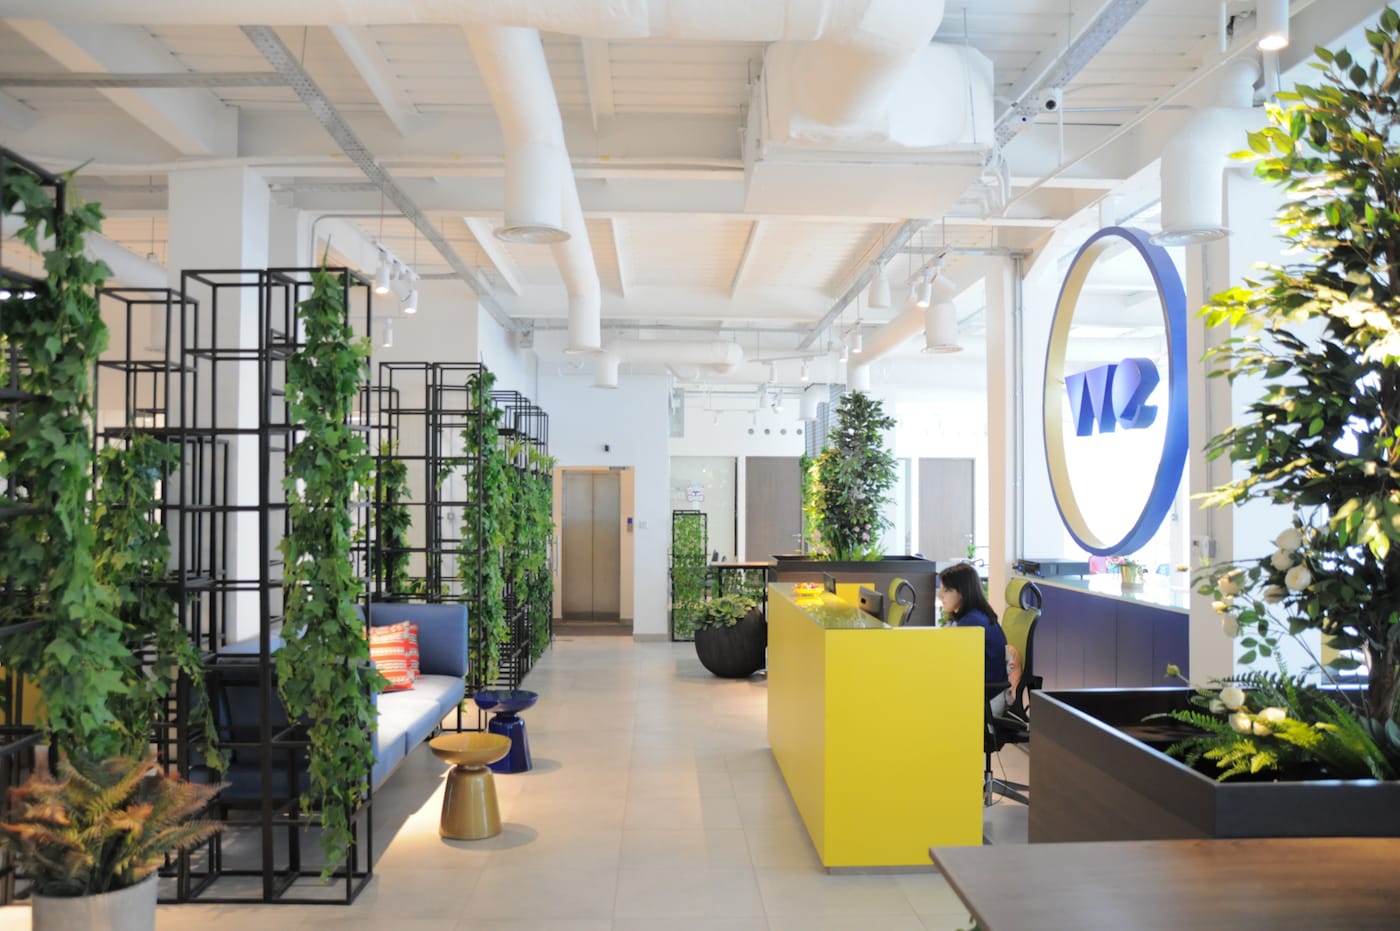 Contemporary office design with plants